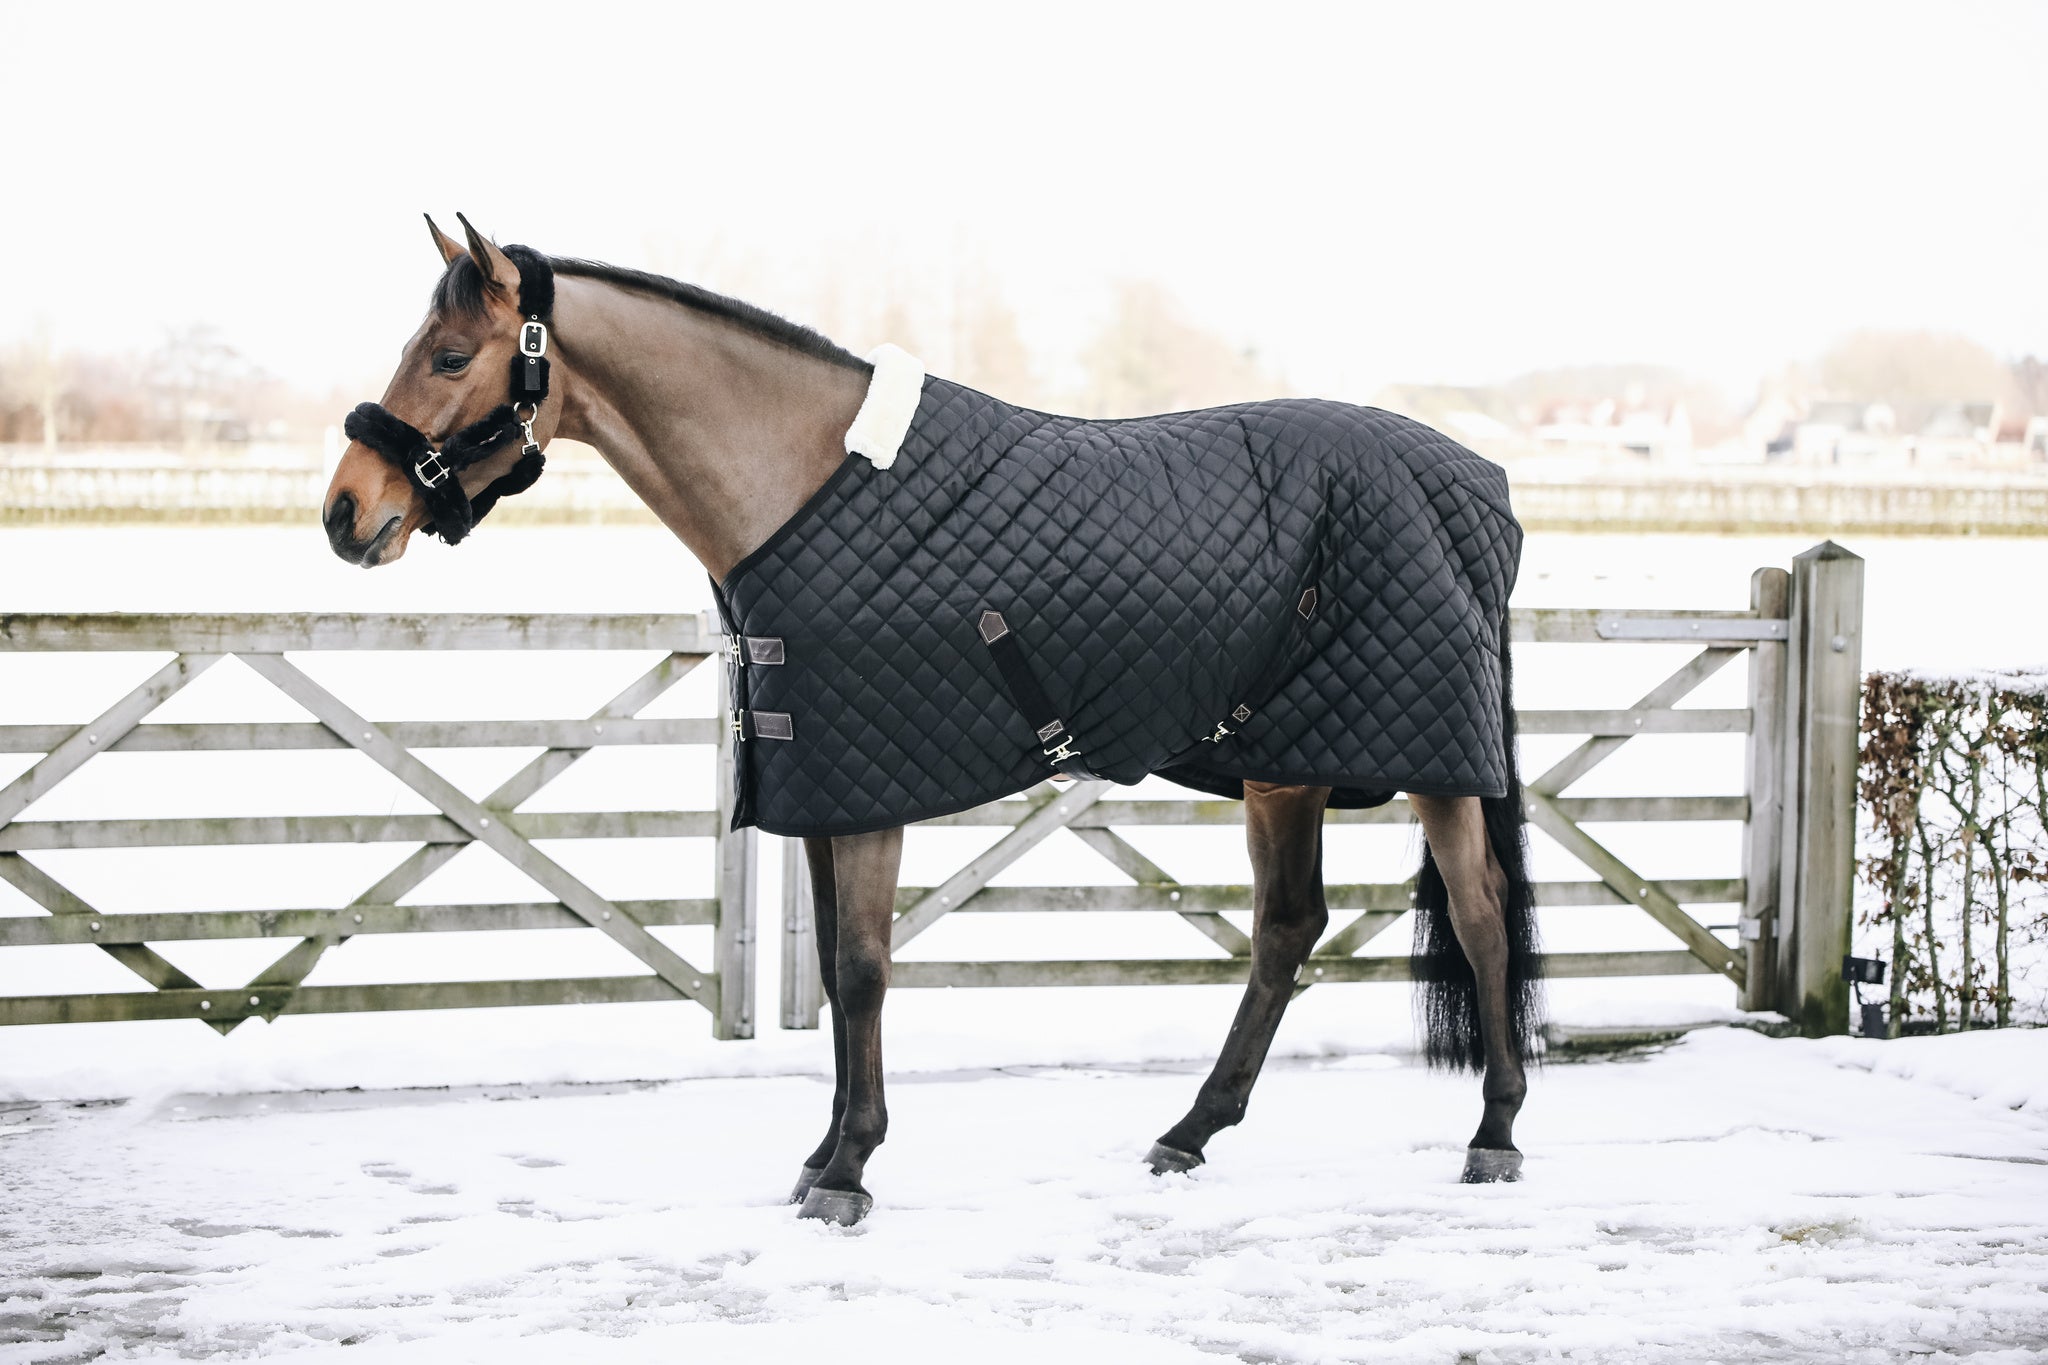 Kentucky Horsewear Stable Rug 400g   The Kentucky Stable Rug 400g is a stand out product from Kentucky Horsewear from their latest range. For any horse this is a very comfortable rug, a must-have for clipped horses or horses with sensitive skin. A lovely product, it is able to offer great warmth and comfort and it’s also a very easy to use rug for any rider. As well as being able to offer warmth, it is also highly breathable thanks to the combination of the materials.